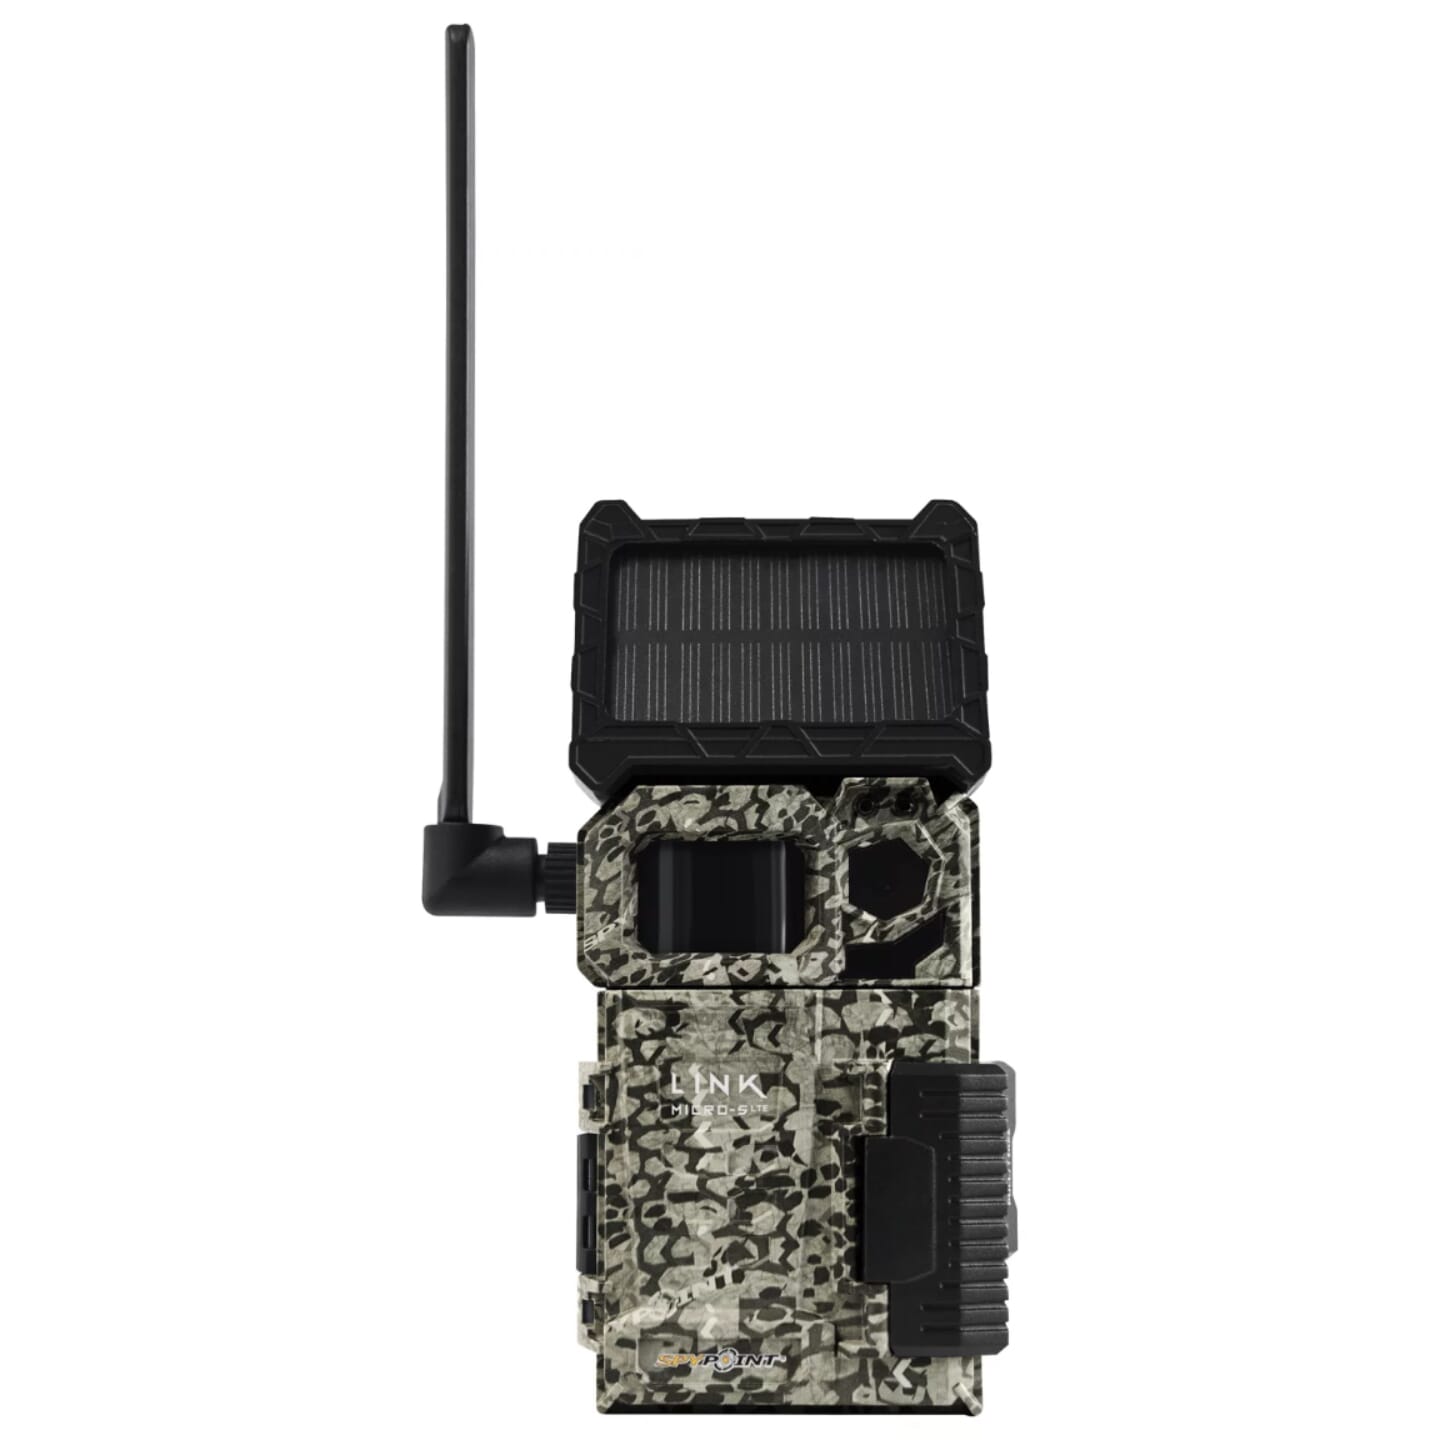 Spypoint Link-Micro-S-LTE Solar Cellular Trail Camera 01898